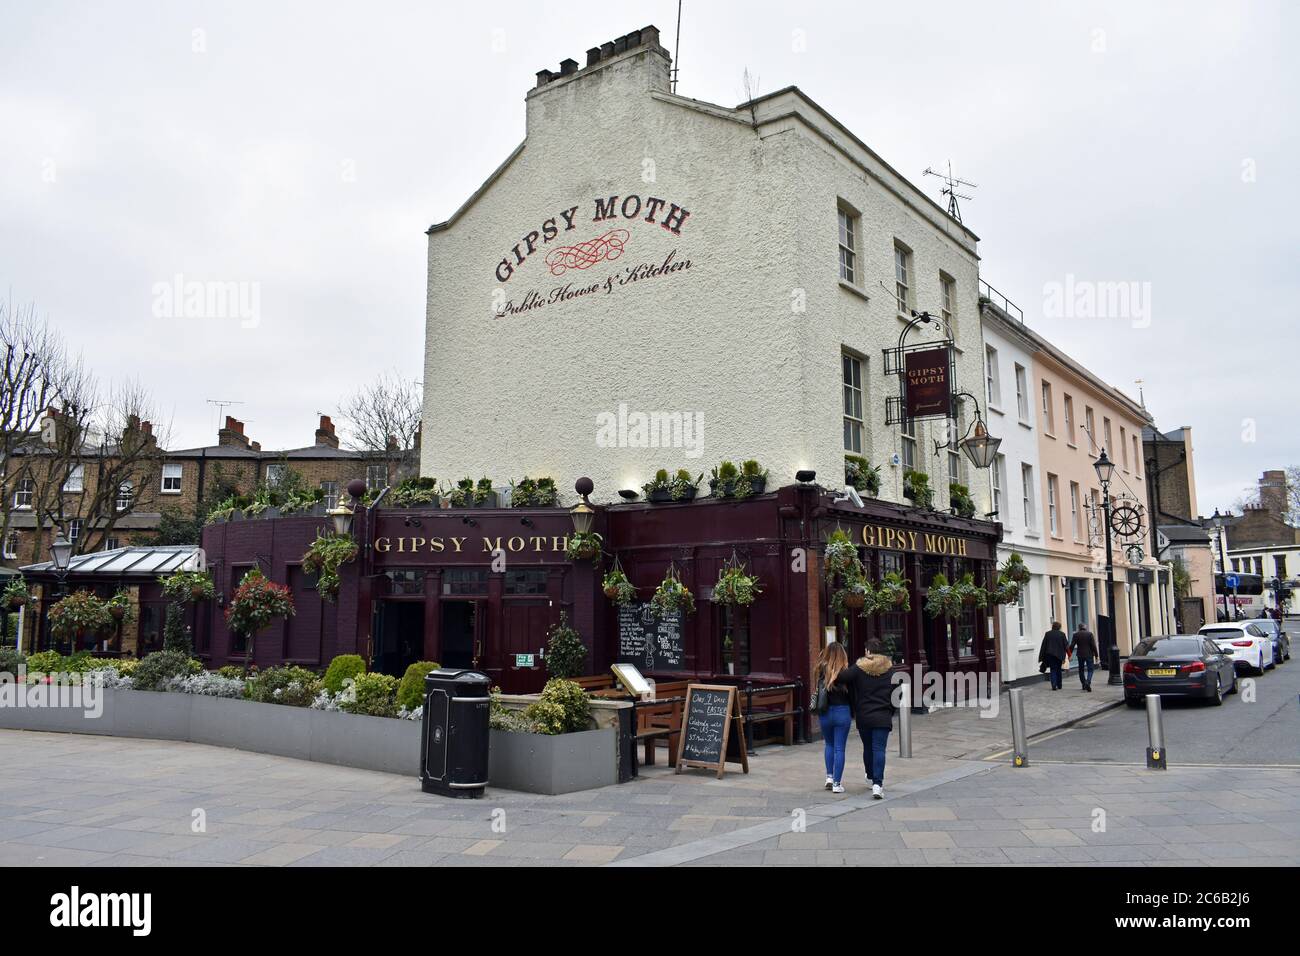 An old fashioned british pub, The Gipsy Moth, in Greenwich, London. The pub has a burgundy lower half with gold writing and a off white main structure. Stock Photo